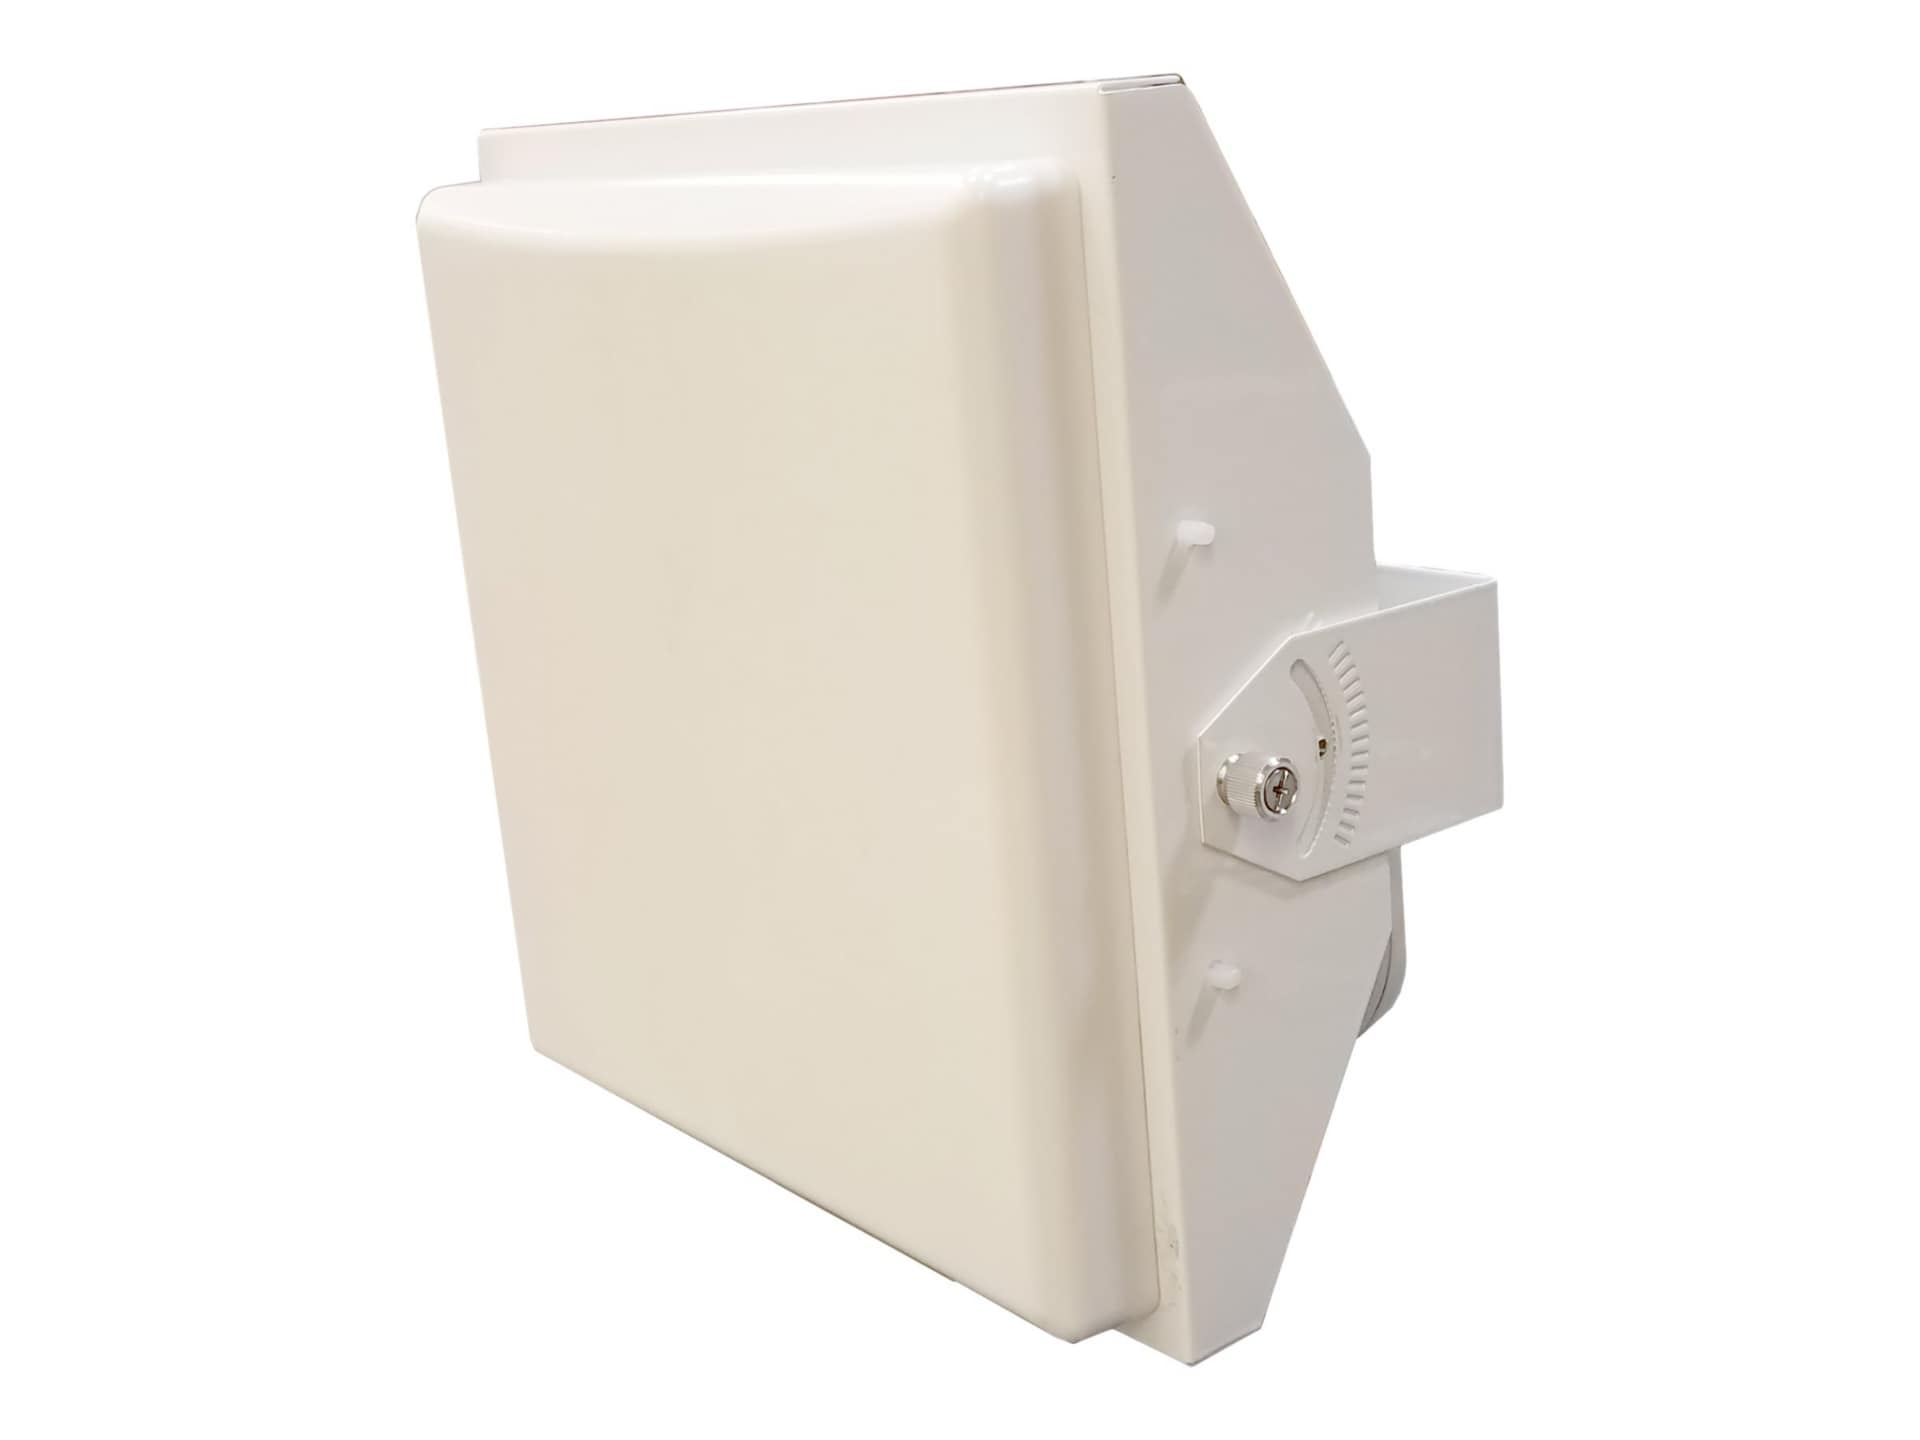 Ventev Single-Axis Universal Co-Locating Mount - wireless access point and antenna mounting kit